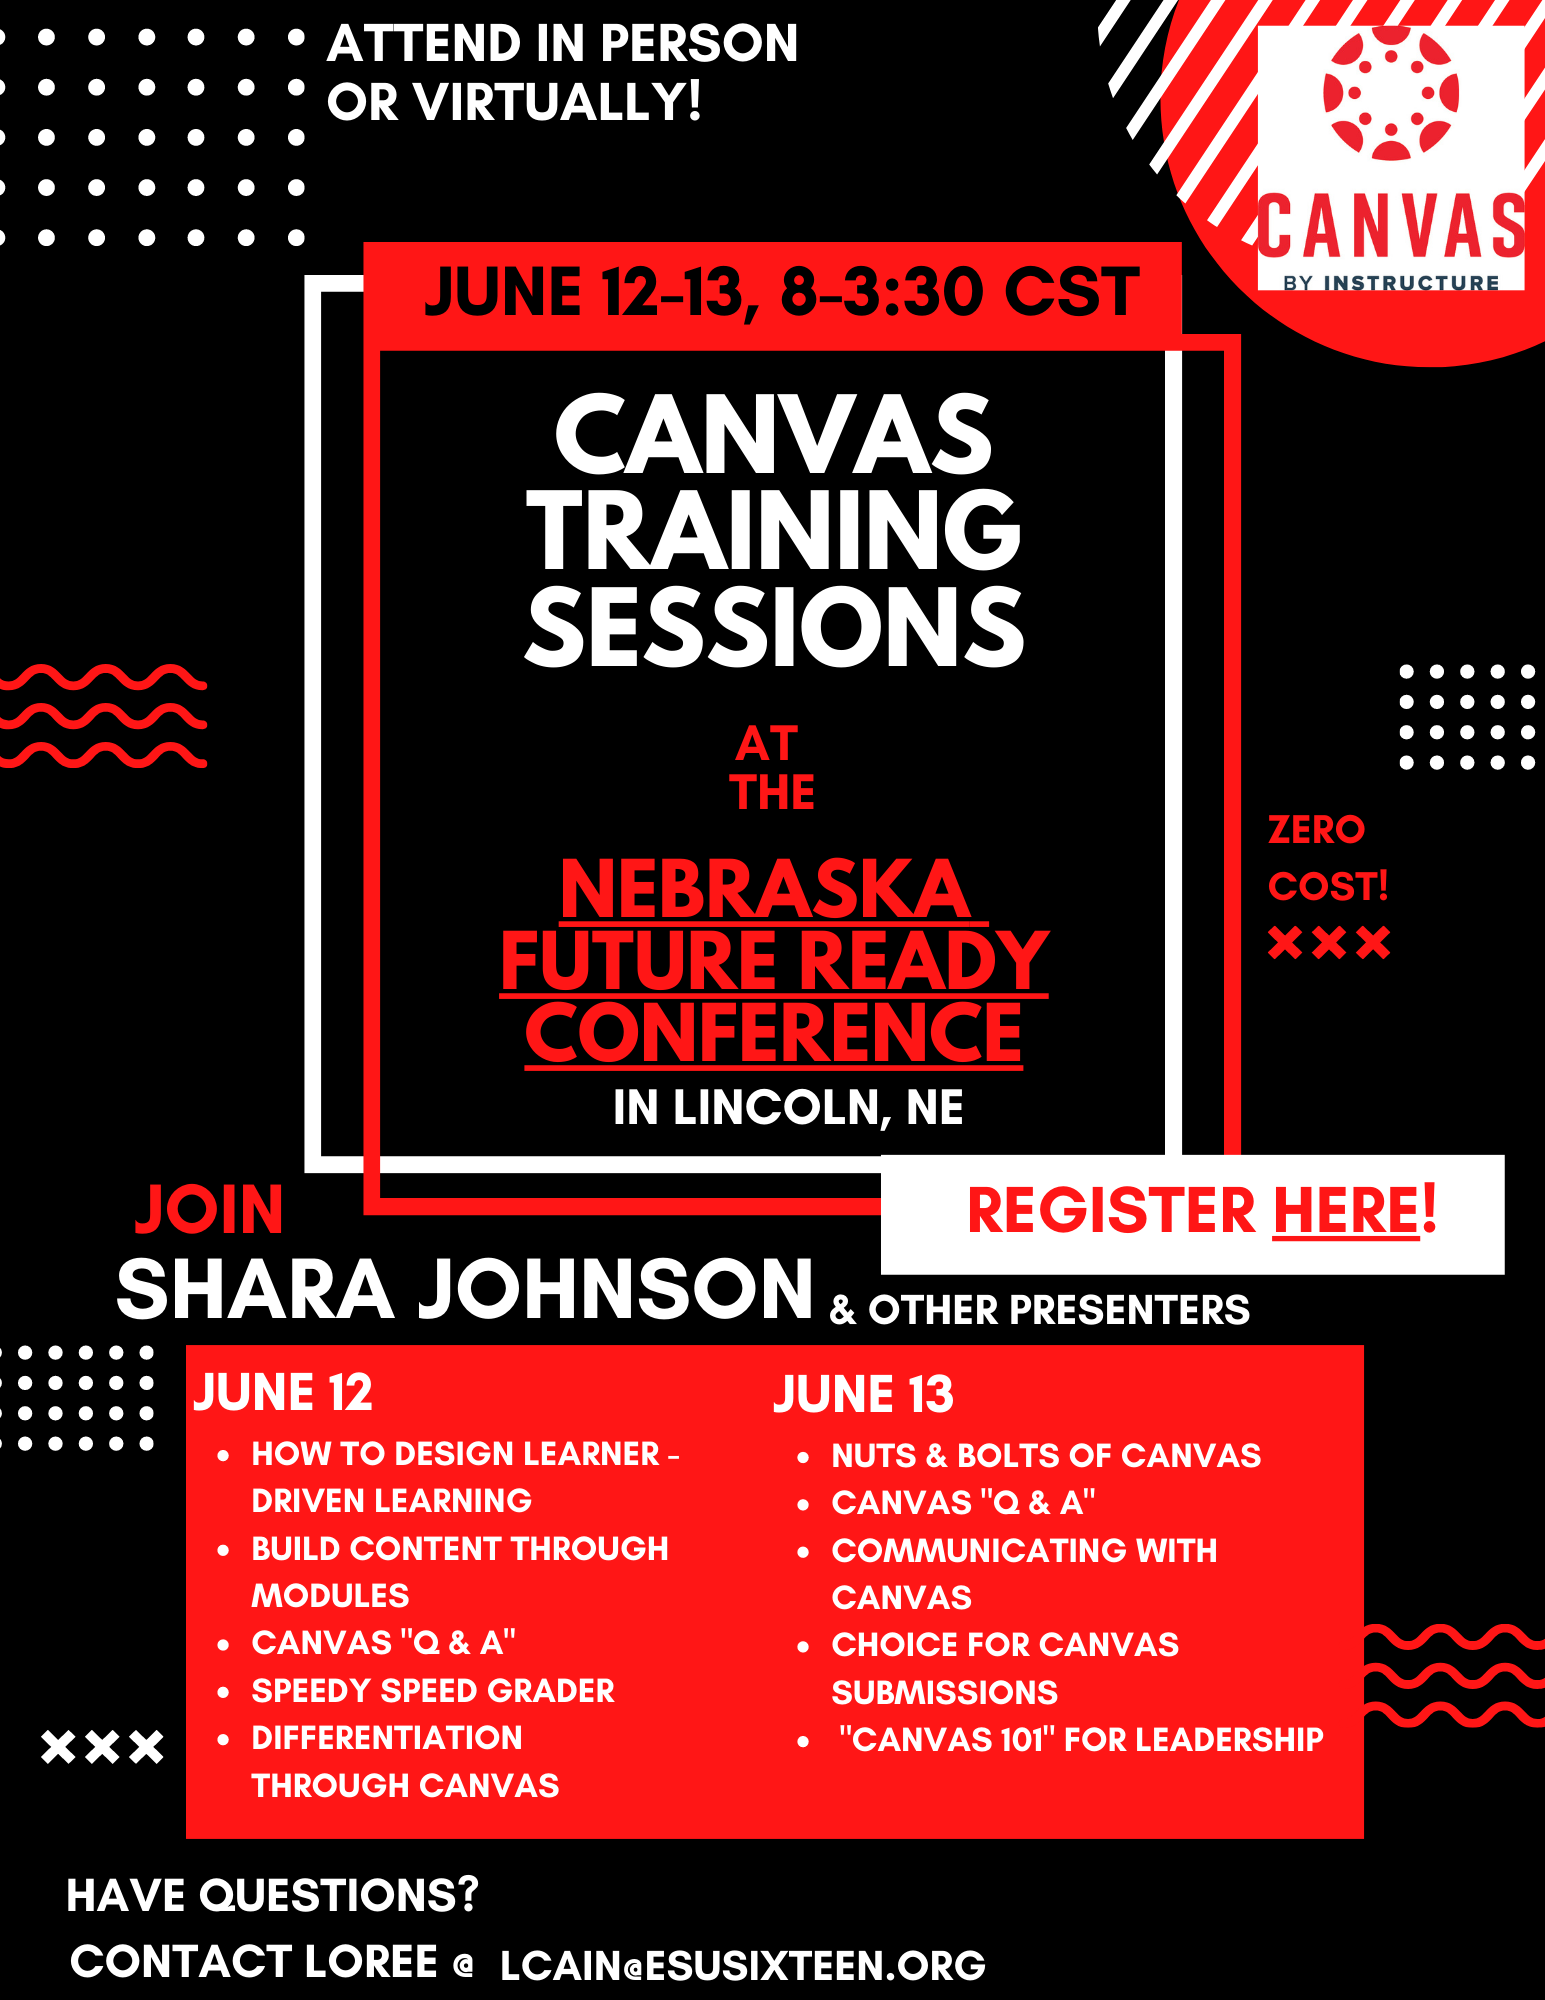 Canvas Training Sessions at the Nebraska Future Ready Conference